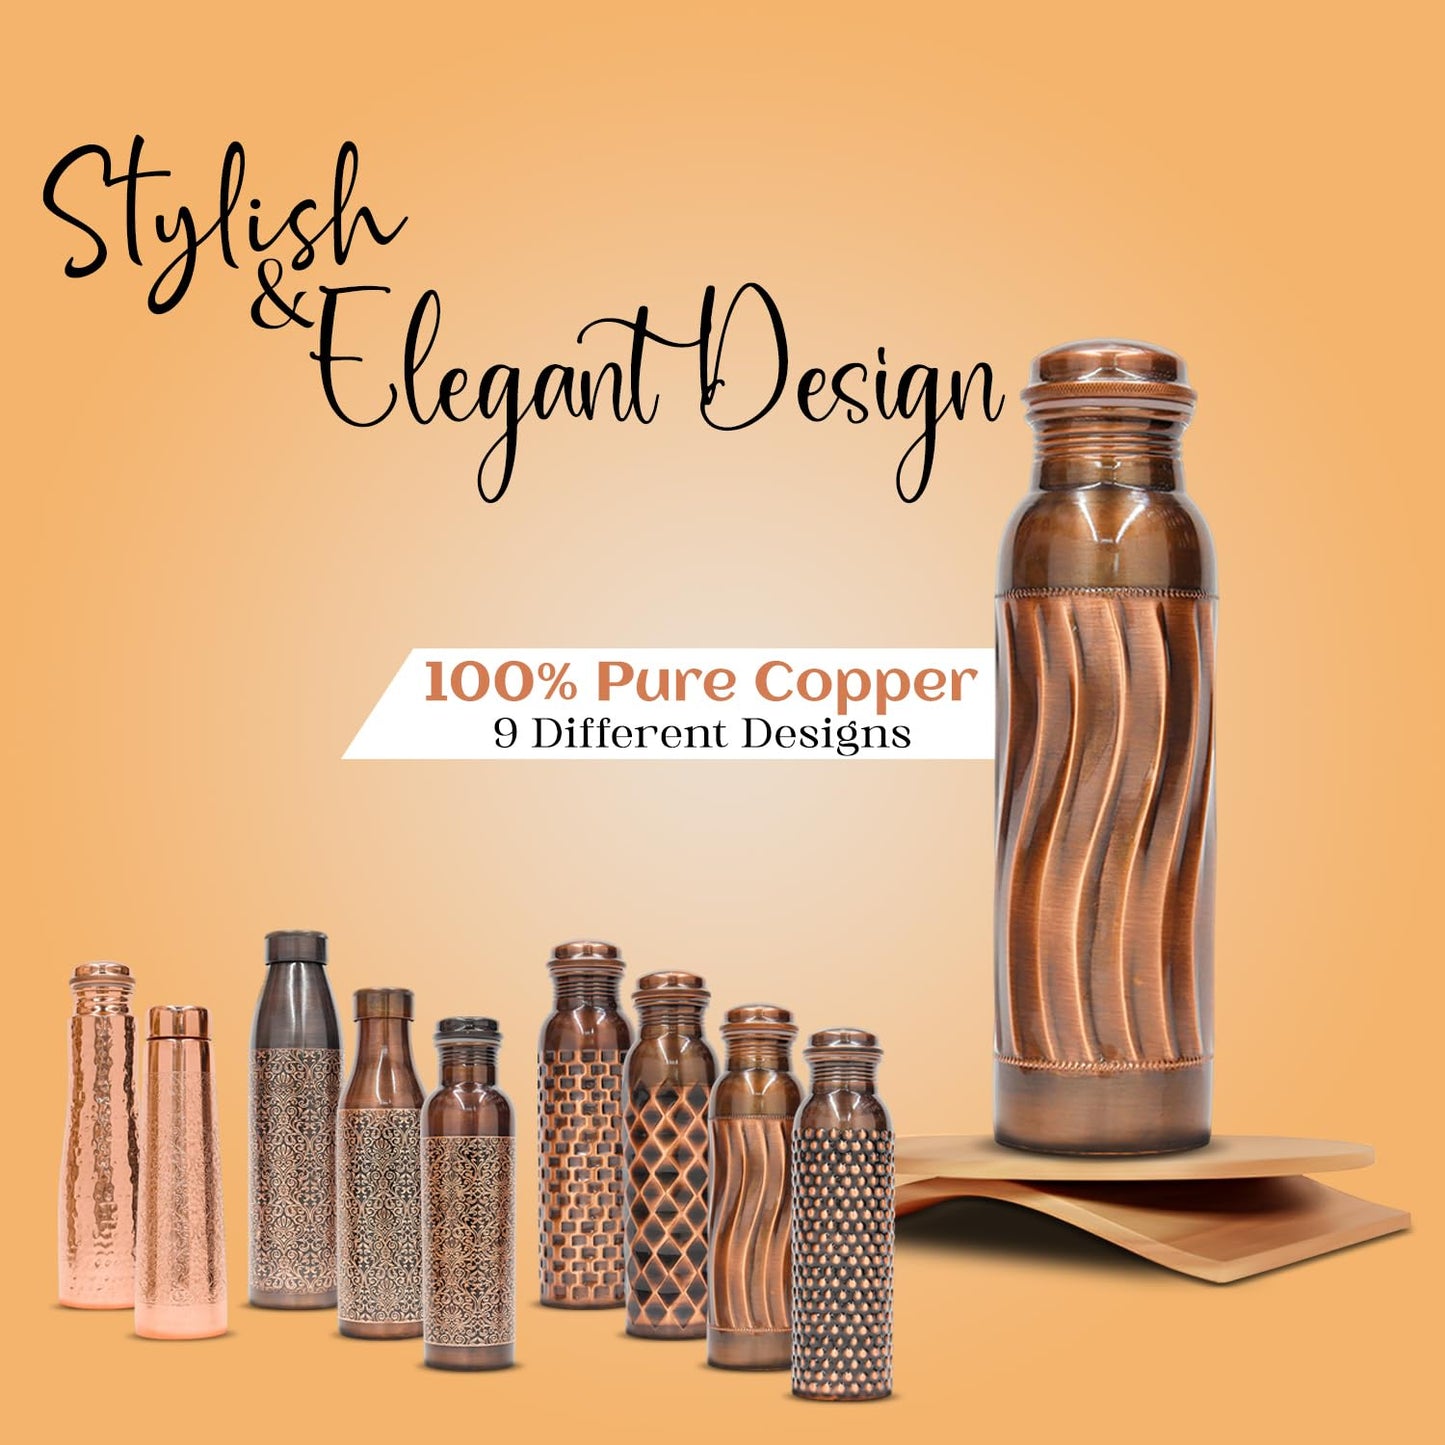 Kuvi Copper Charge 1000ml Water Bottle 100% Pure Copper Water Bottle Leak Proof & Rust Proof for Home, School & Office (1000 ml) (Tappered Design)